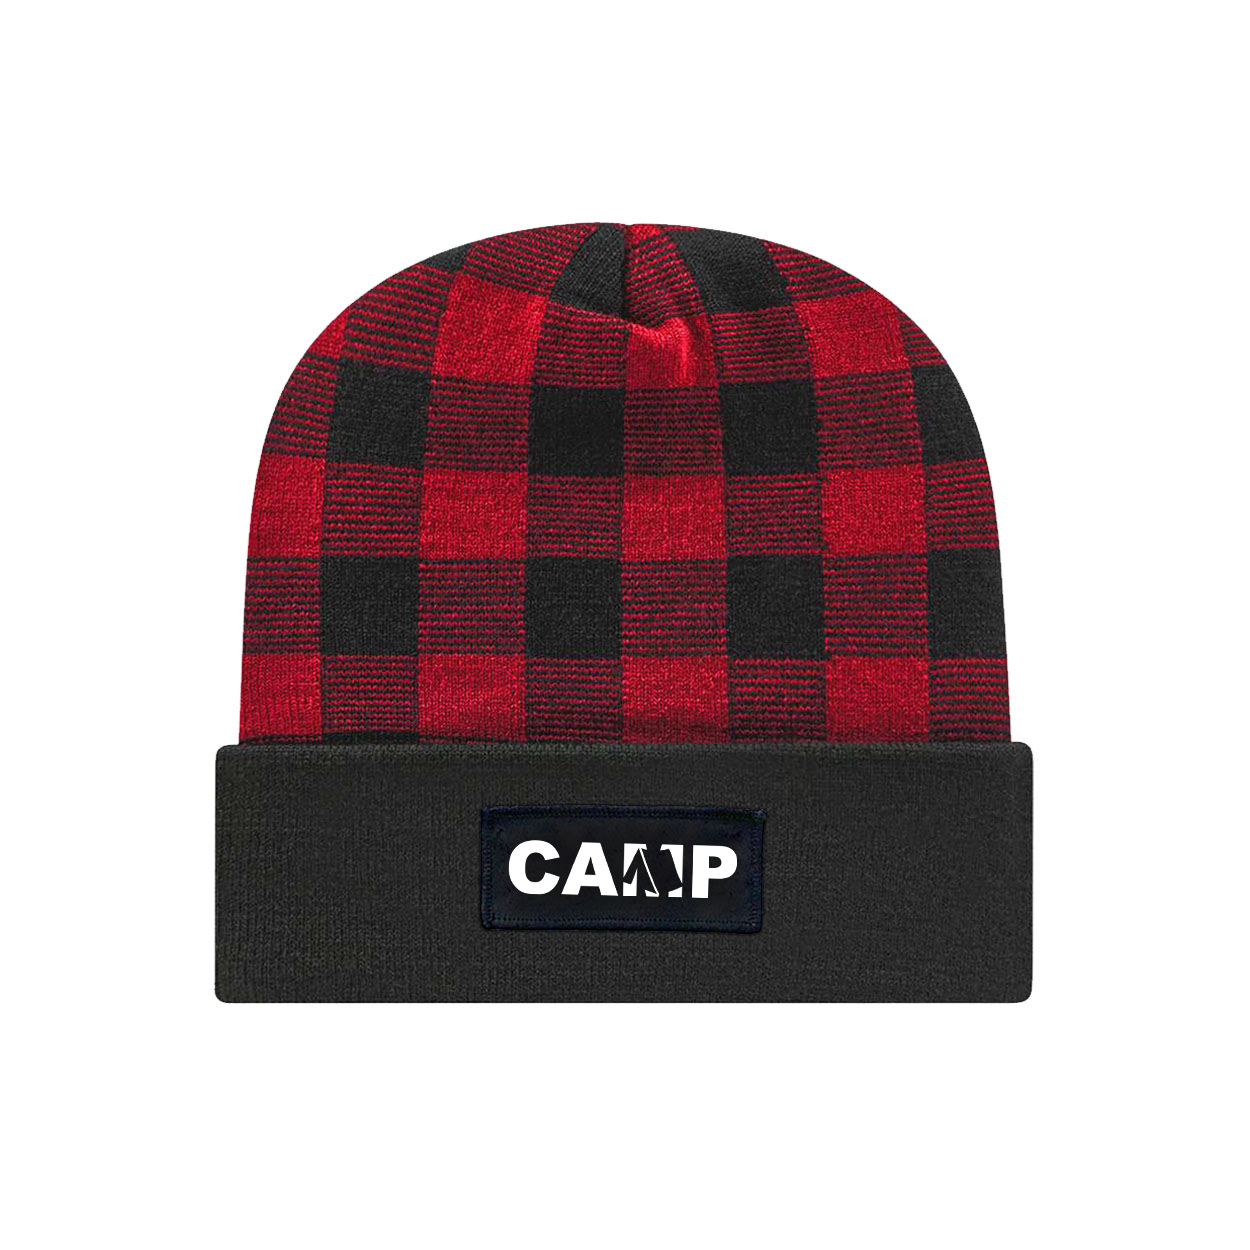 Camp Tent Logo Night Out Woven Patch Roll Up Plaid Beanie Black/True Red (White Logo)